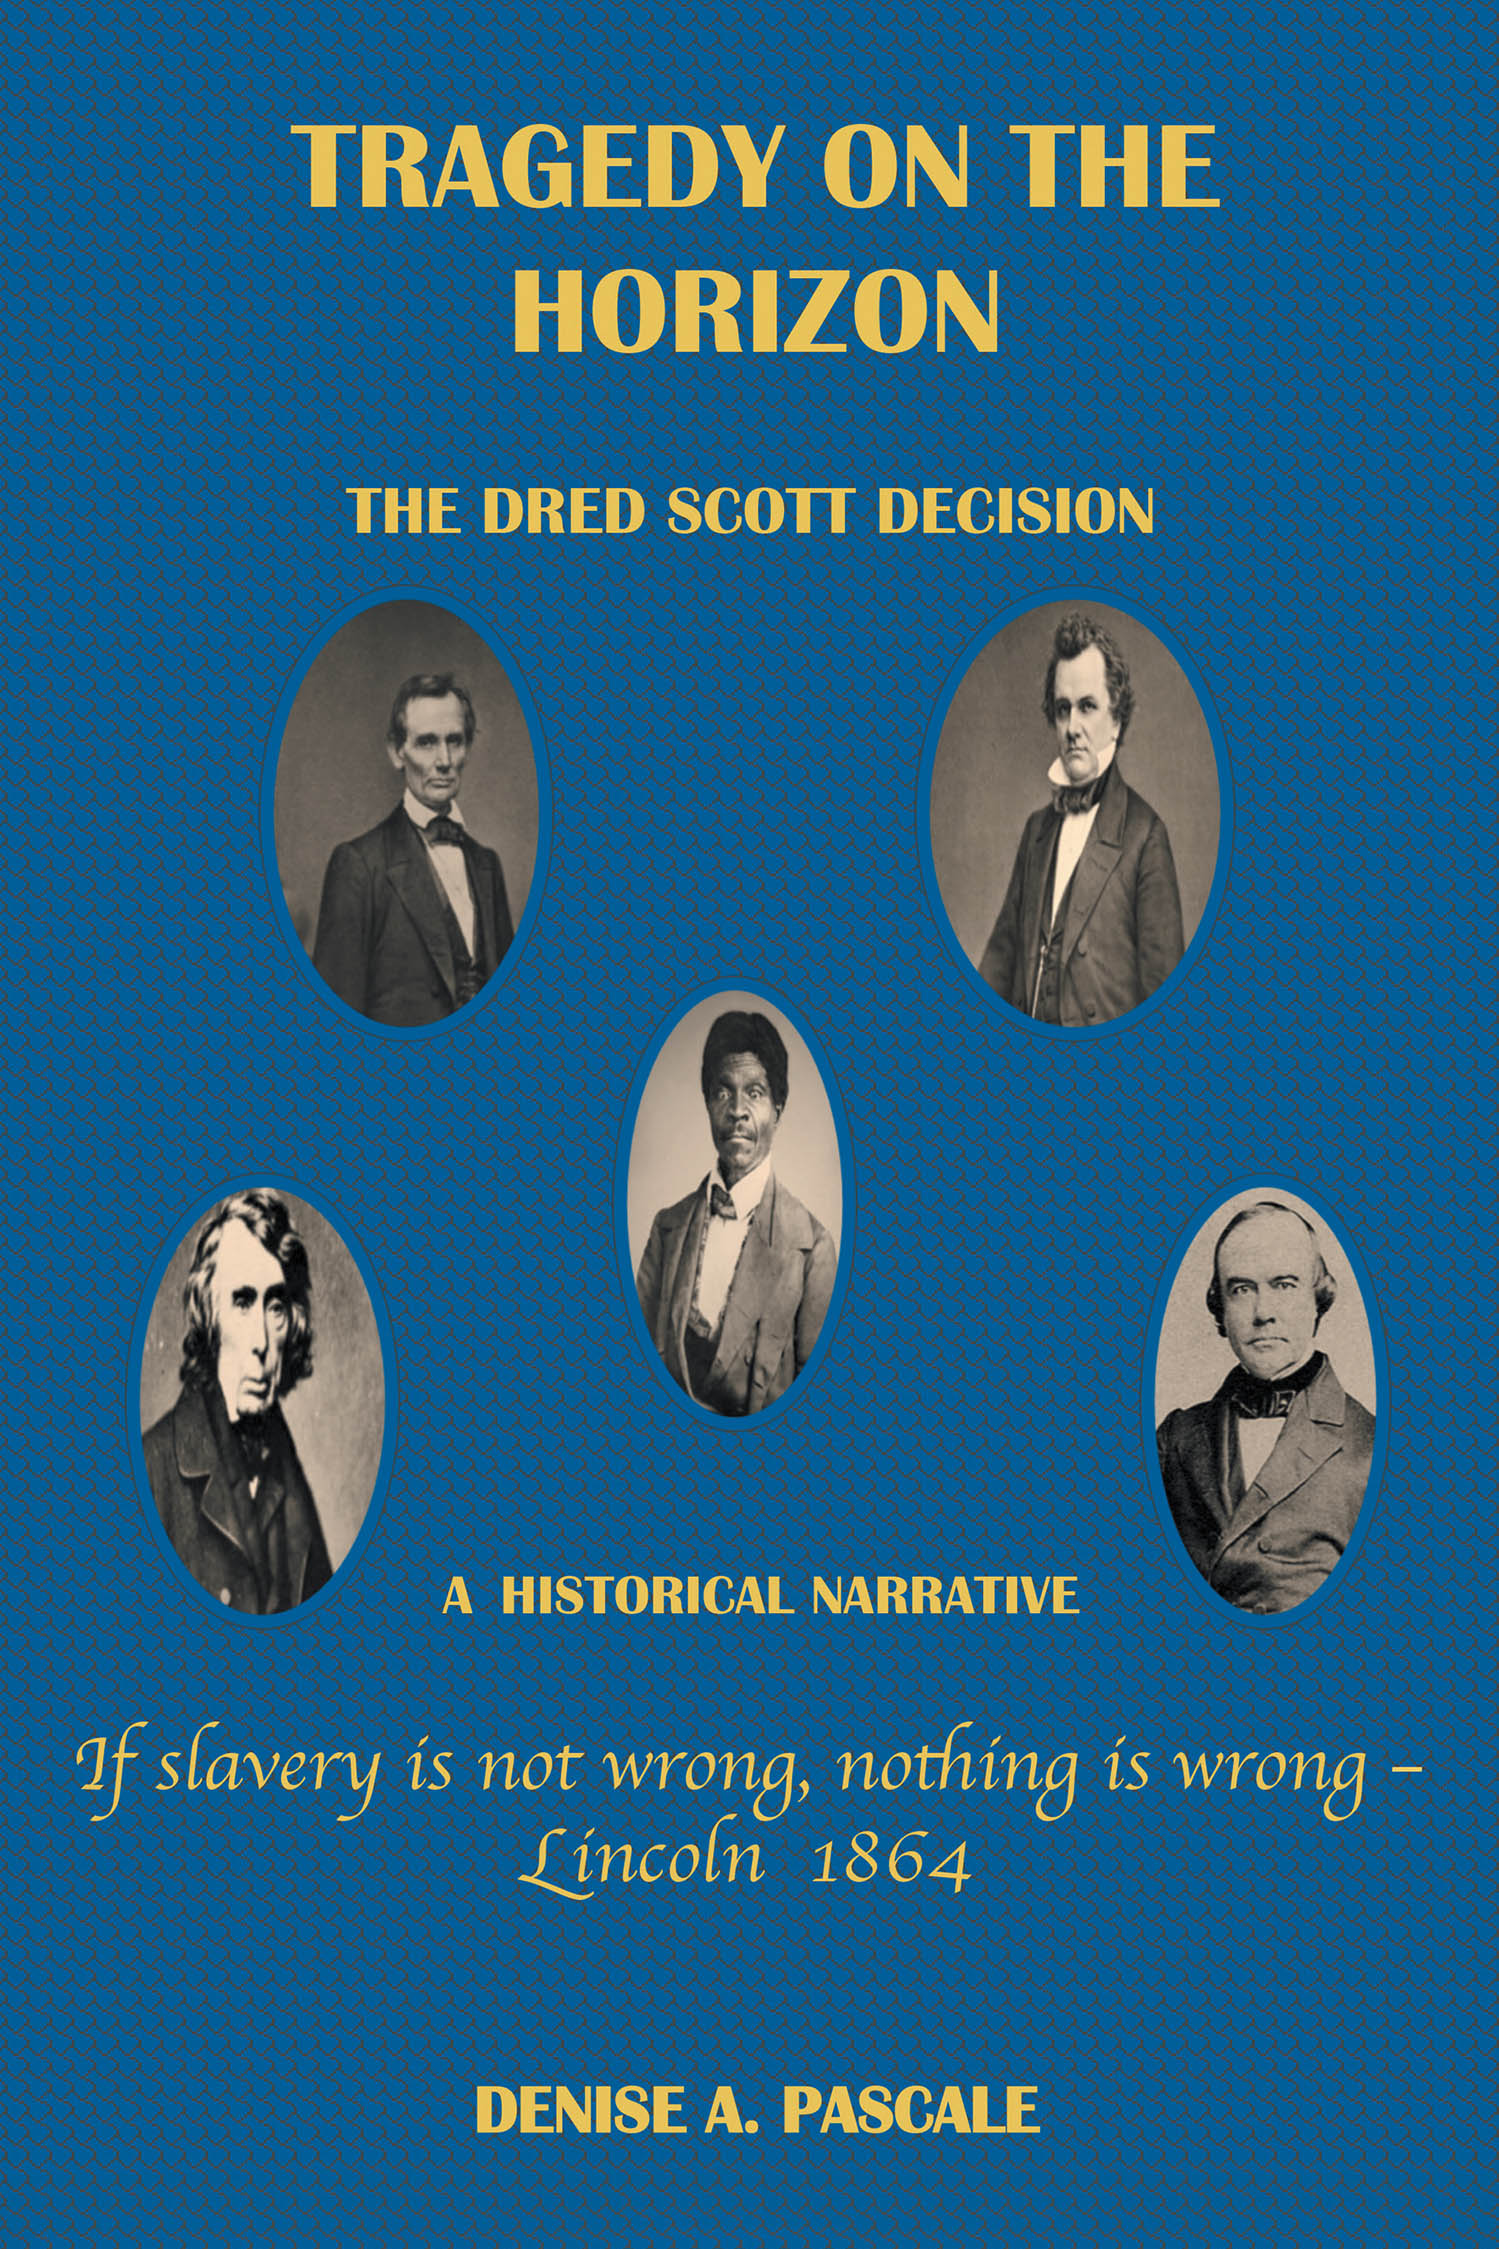 Author Denise A. Pascale’s New Book, "Tragedy on the Horizon," is a Thought-Provoking Exploration of the Immediate and Lasting Consequences of the Dred Scott Decision